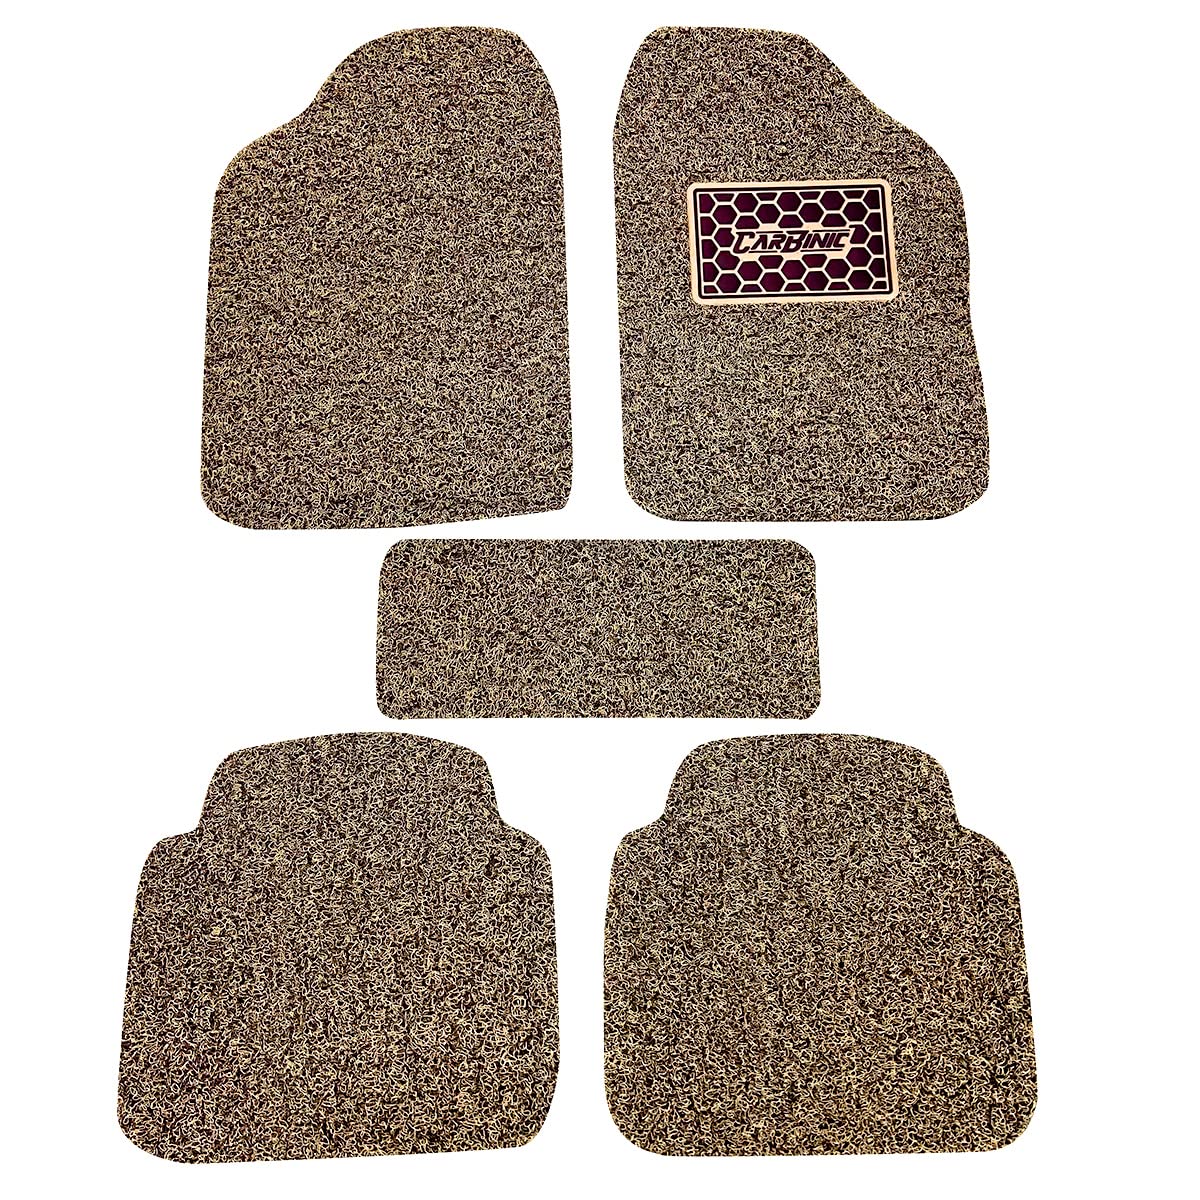 CarBinic Anti-Skid Car Foot Mat - Universal Fits for All Cars